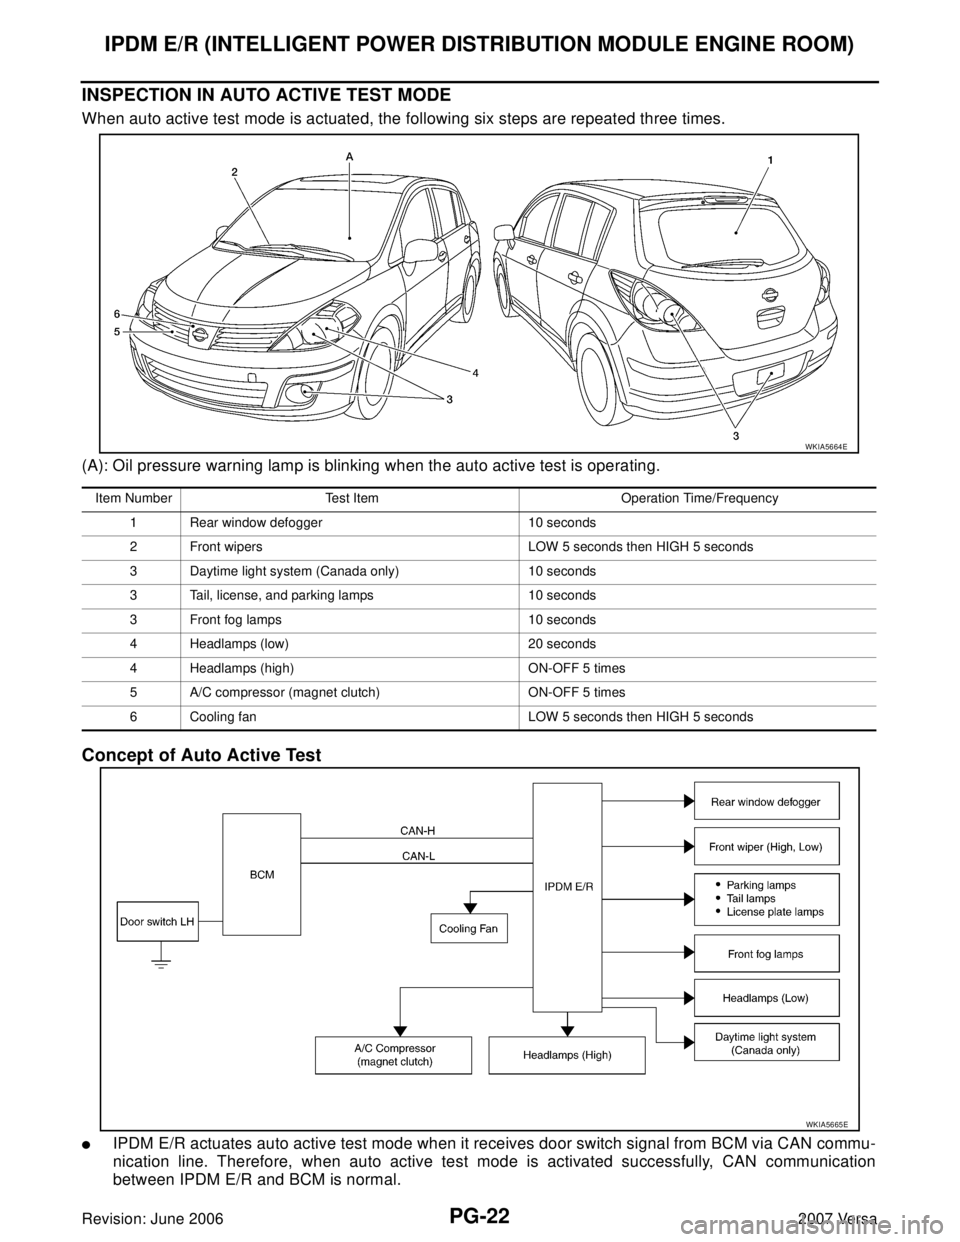 NISSAN TIIDA 2007  Service Repair Manual PG-22
IPDM E/R (INTELLIGENT POWER DISTRIBUTION MODULE ENGINE ROOM)
Revision: June 20062007 Versa
INSPECTION IN AUTO ACTIVE TEST MODE
When auto active test mode is actuated, the following six steps are